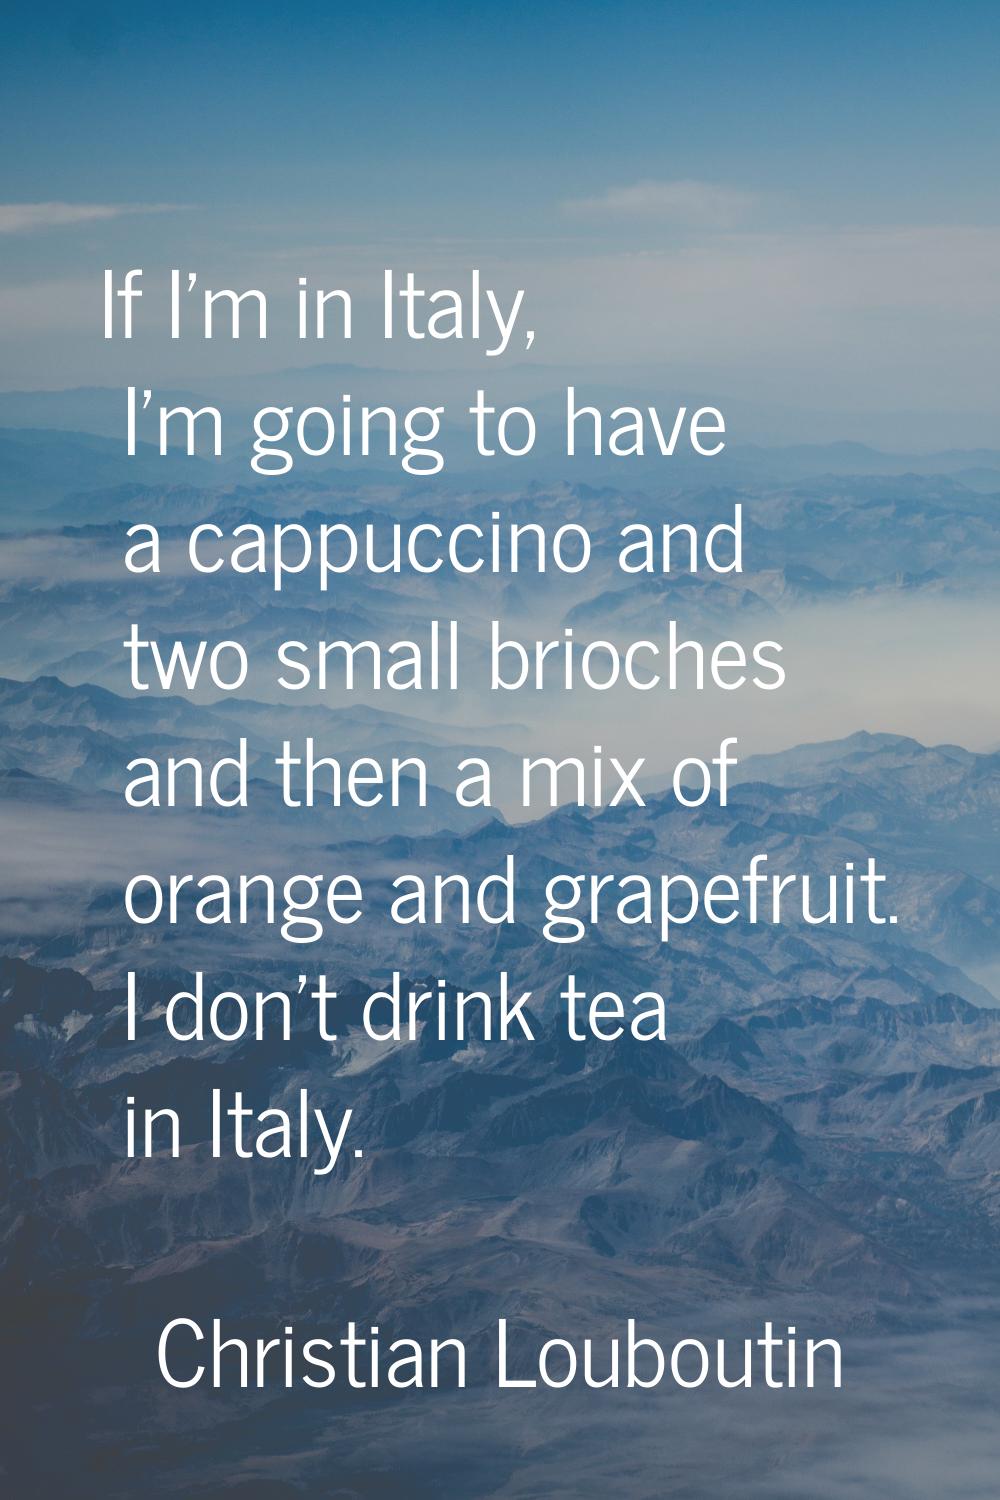 If I'm in Italy, I'm going to have a cappuccino and two small brioches and then a mix of orange and